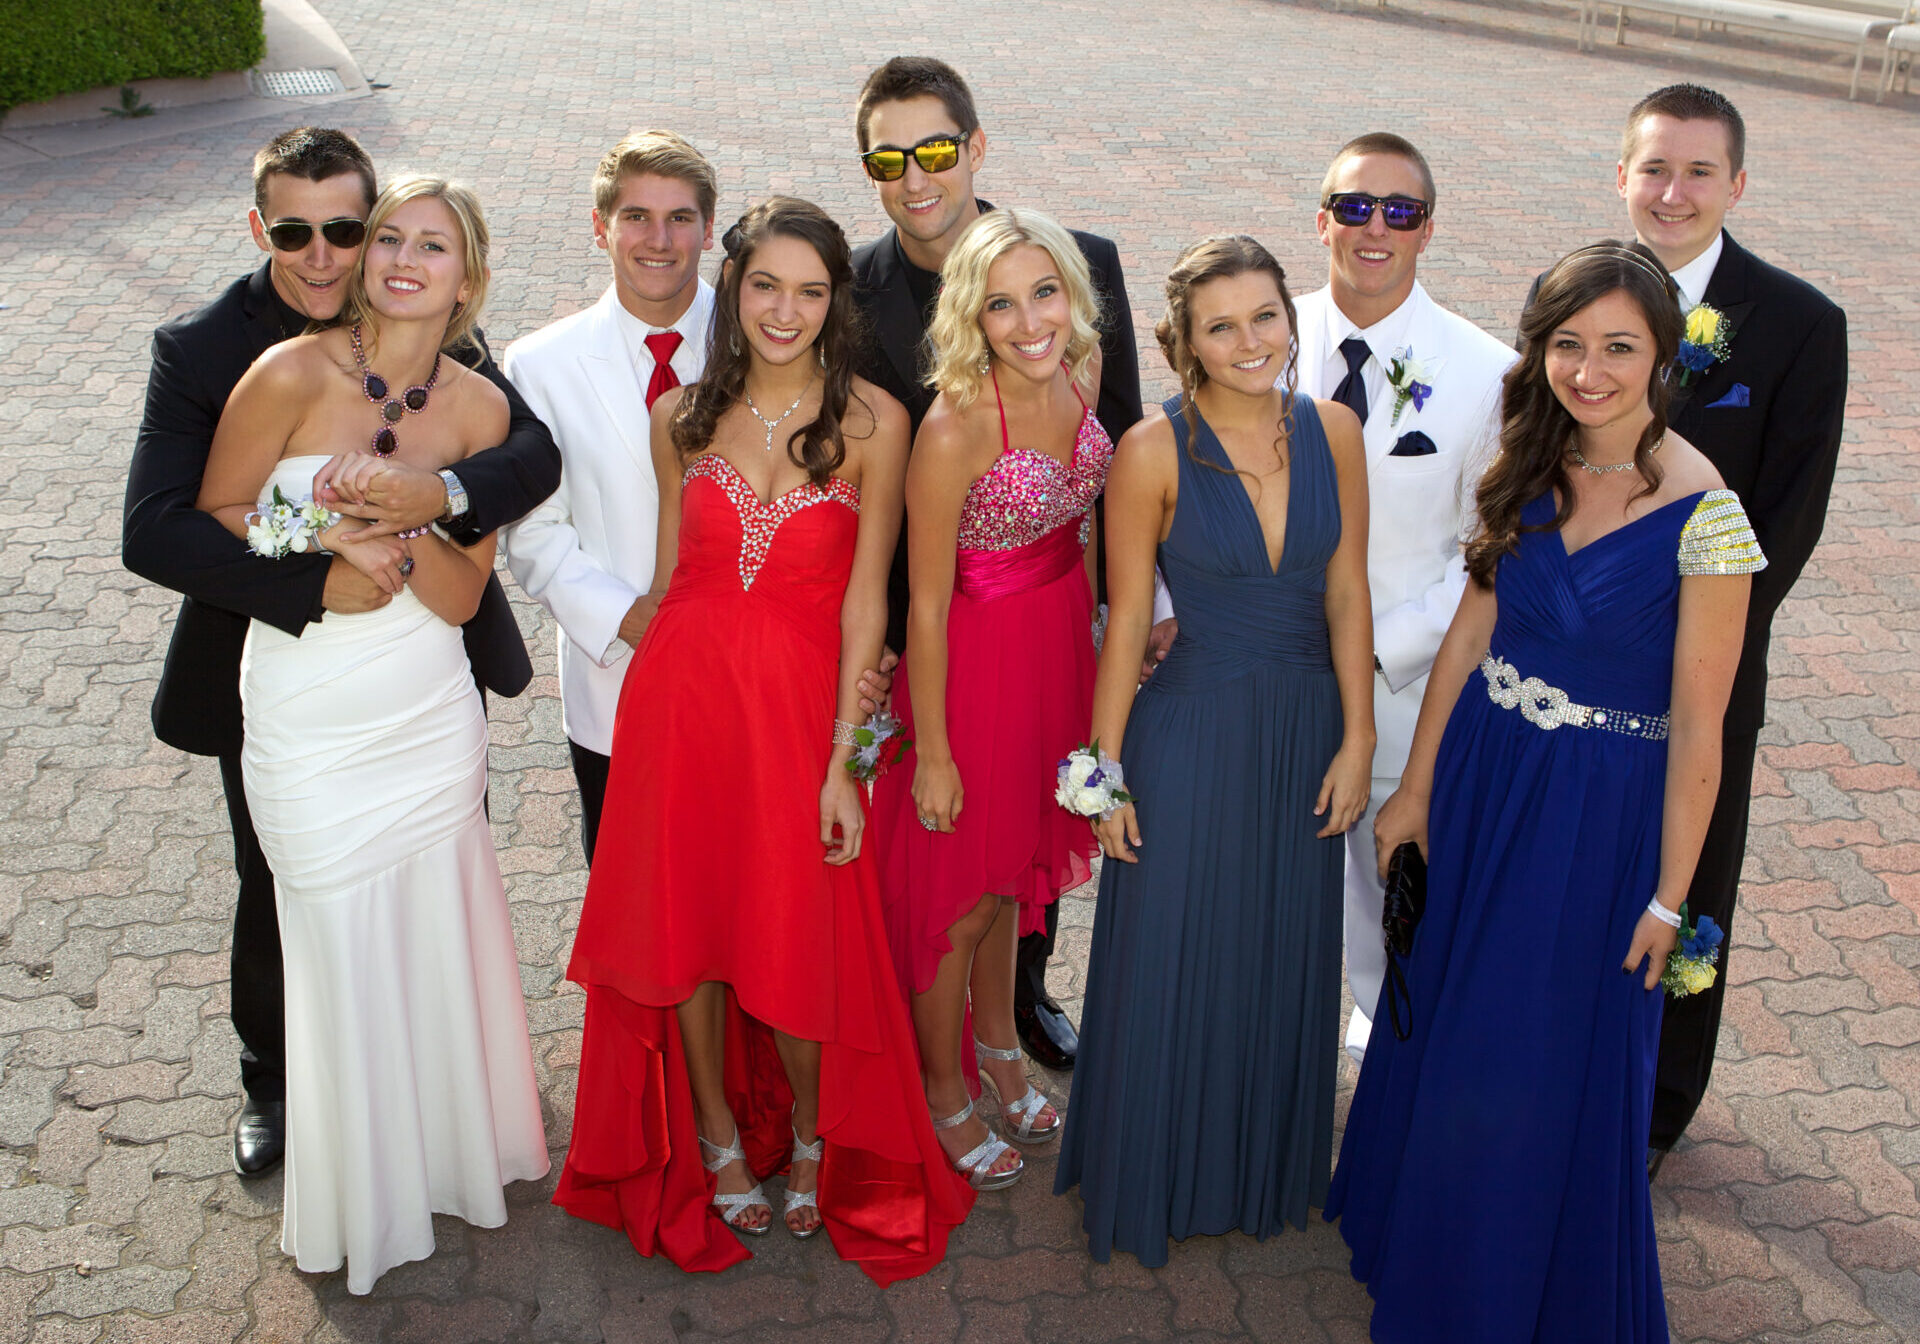 Large,Group,Of,Teenagers,Going,To,The,Prom